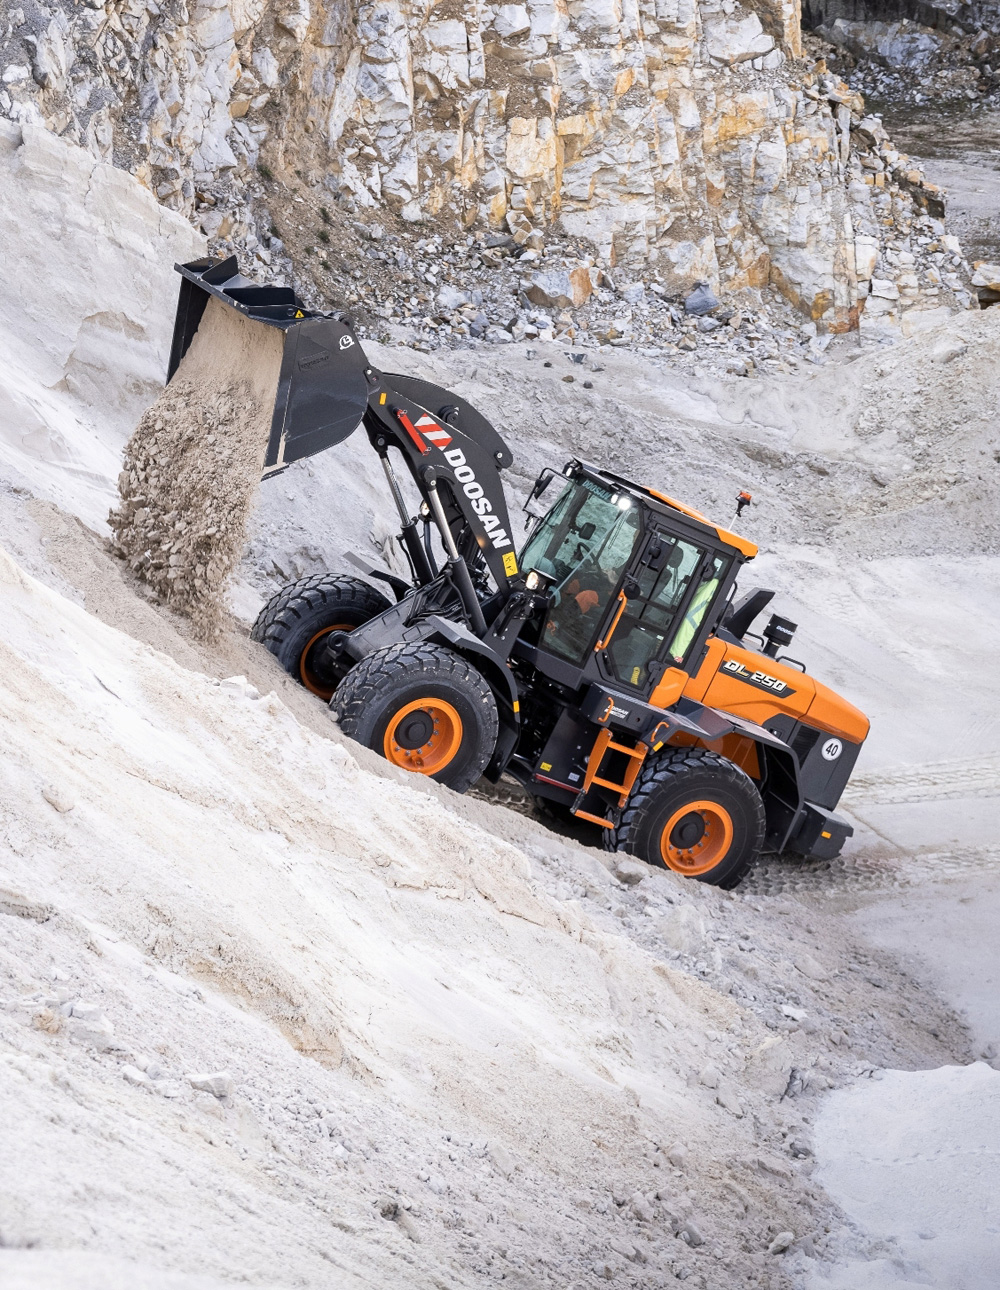 Improved performance is claimed for the new generation Doosan loader